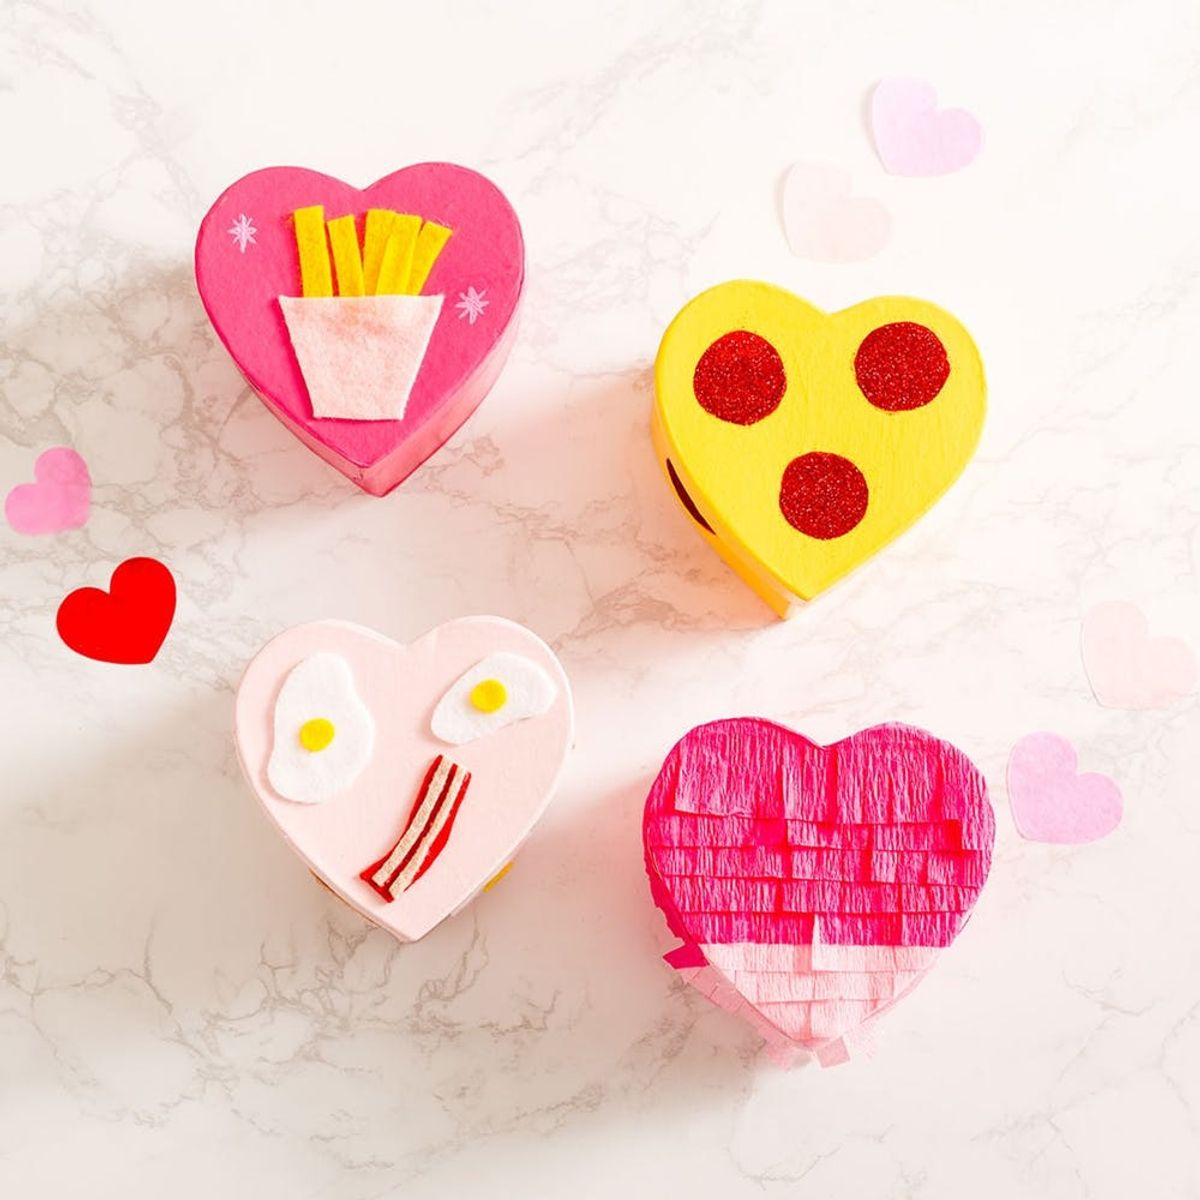 A Heartfelt DIY Gift Just in Time for Valentine’s Day